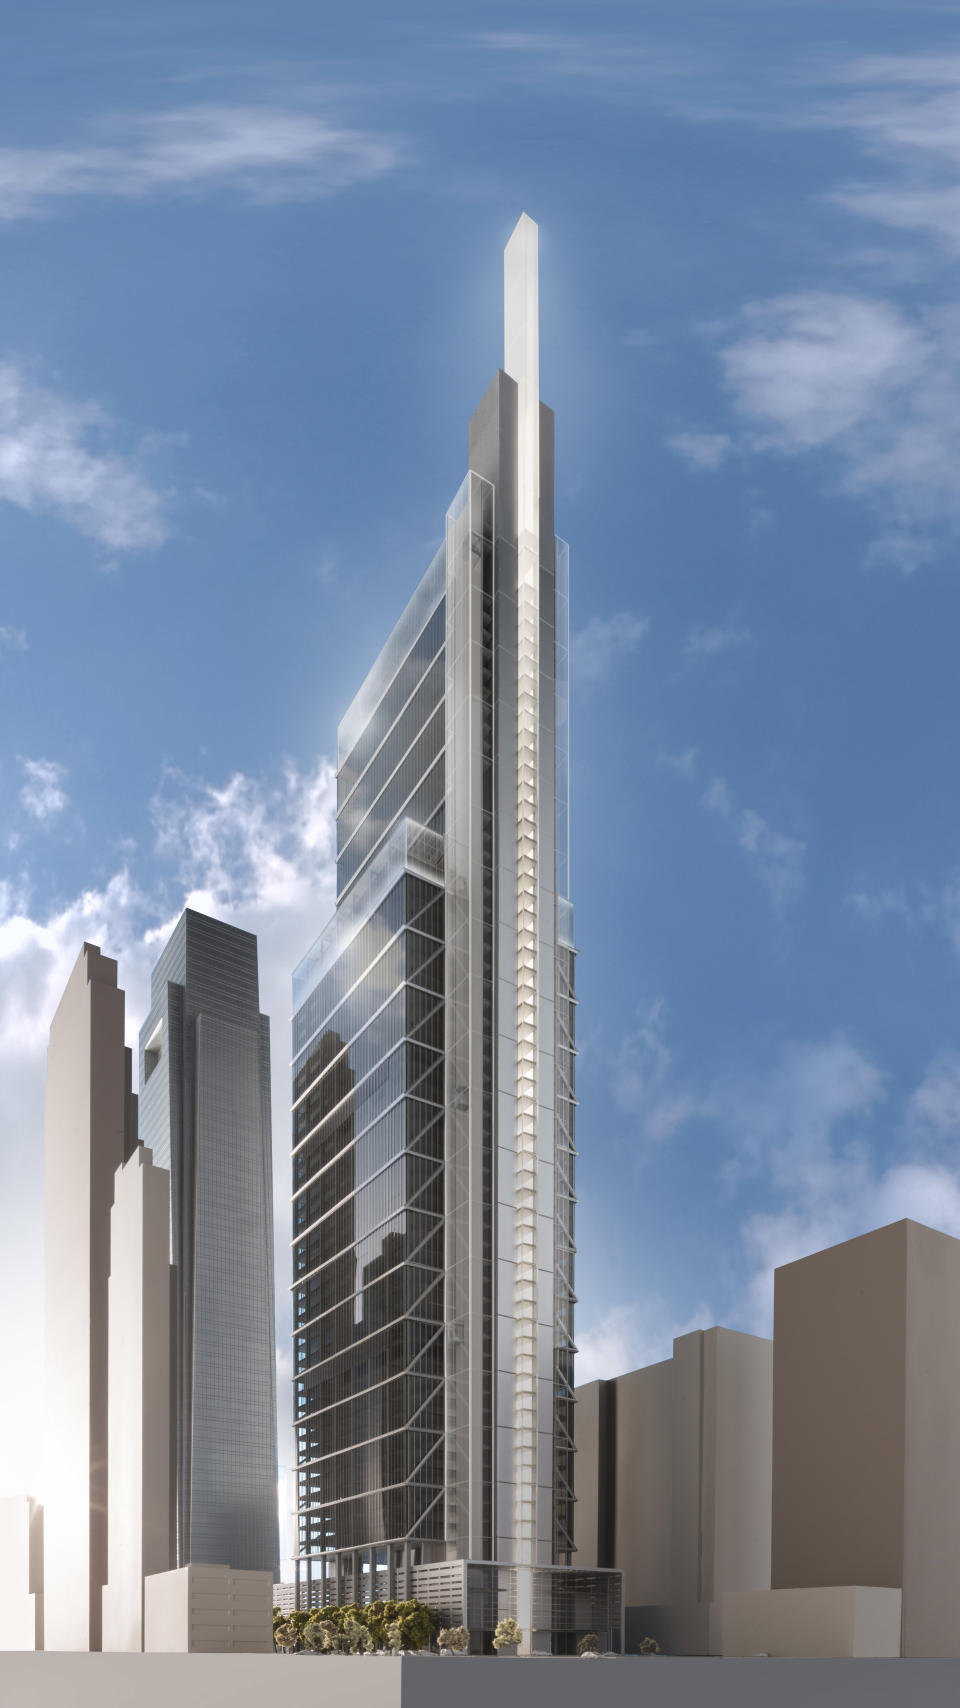 This artist rendering provided by Comcast Corp. on Wednesday, Jan. 15, 2014, shows their planned new skyscraper. The Philadelphia-based company said it plans to build a $1.2 billion, 59-story technology center that will rise 1,121 feet next to the existing Comcast Center, which stands 975 feet tall and opened in June 2008. (AP Photo/Comcast Corp.)